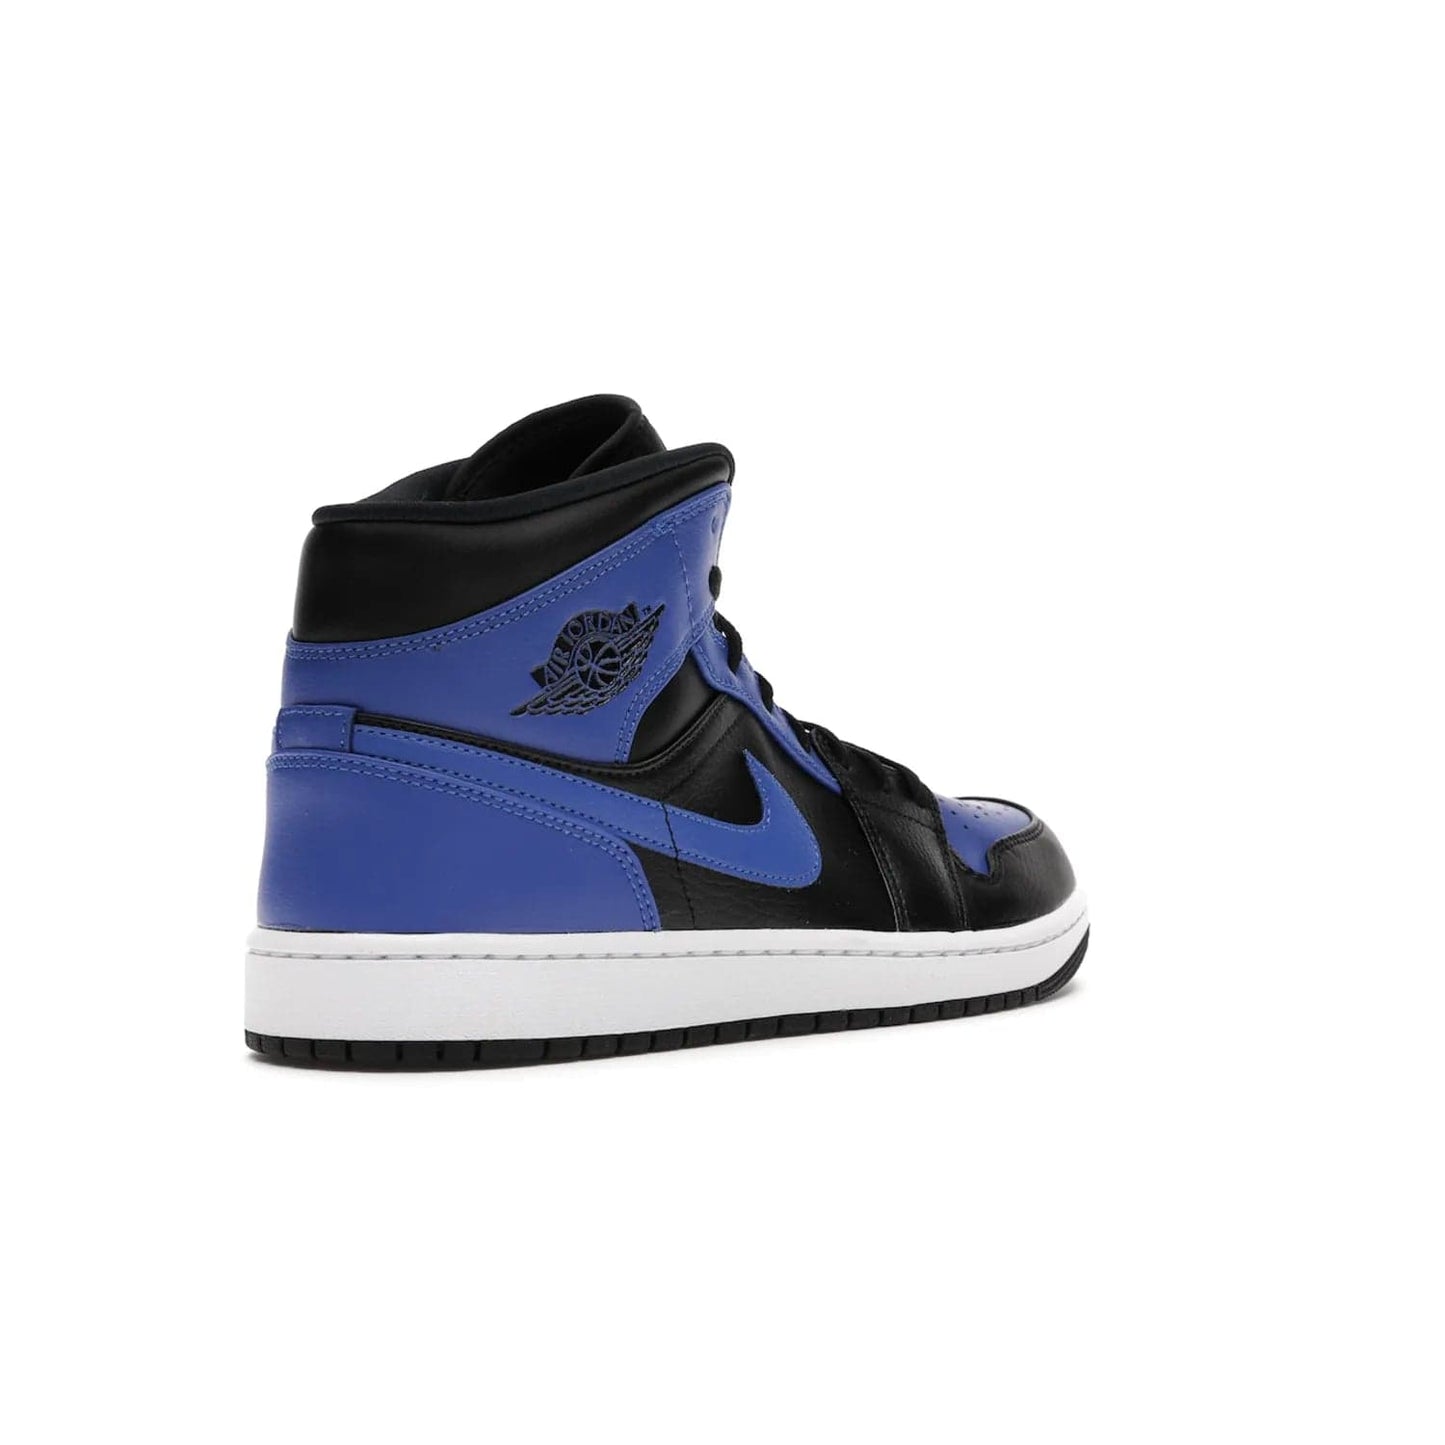 Jordan 1 Mid Hyper Royal Tumbled Leather - Image 32 - Only at www.BallersClubKickz.com - Iconic colorway of the Air Jordan 1 Mid Black Royal Tumbled Leather. Features a black tumbled leather upper, royal blue leather overlays, white midsole & black rubber outsole. Released December 2020. Adds premium style to any collection.